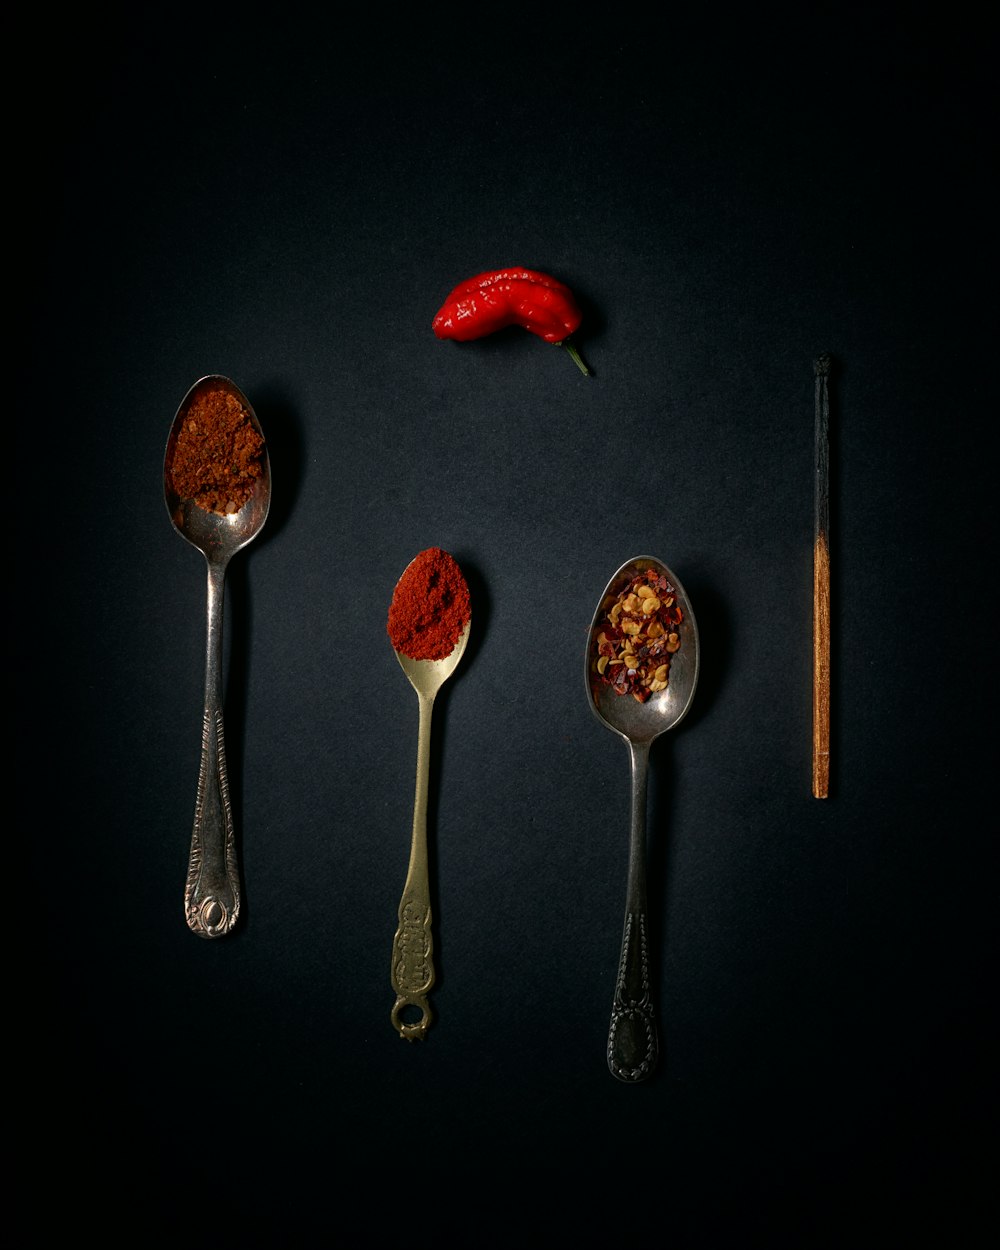 stainless steel spoons with red and brown liquid